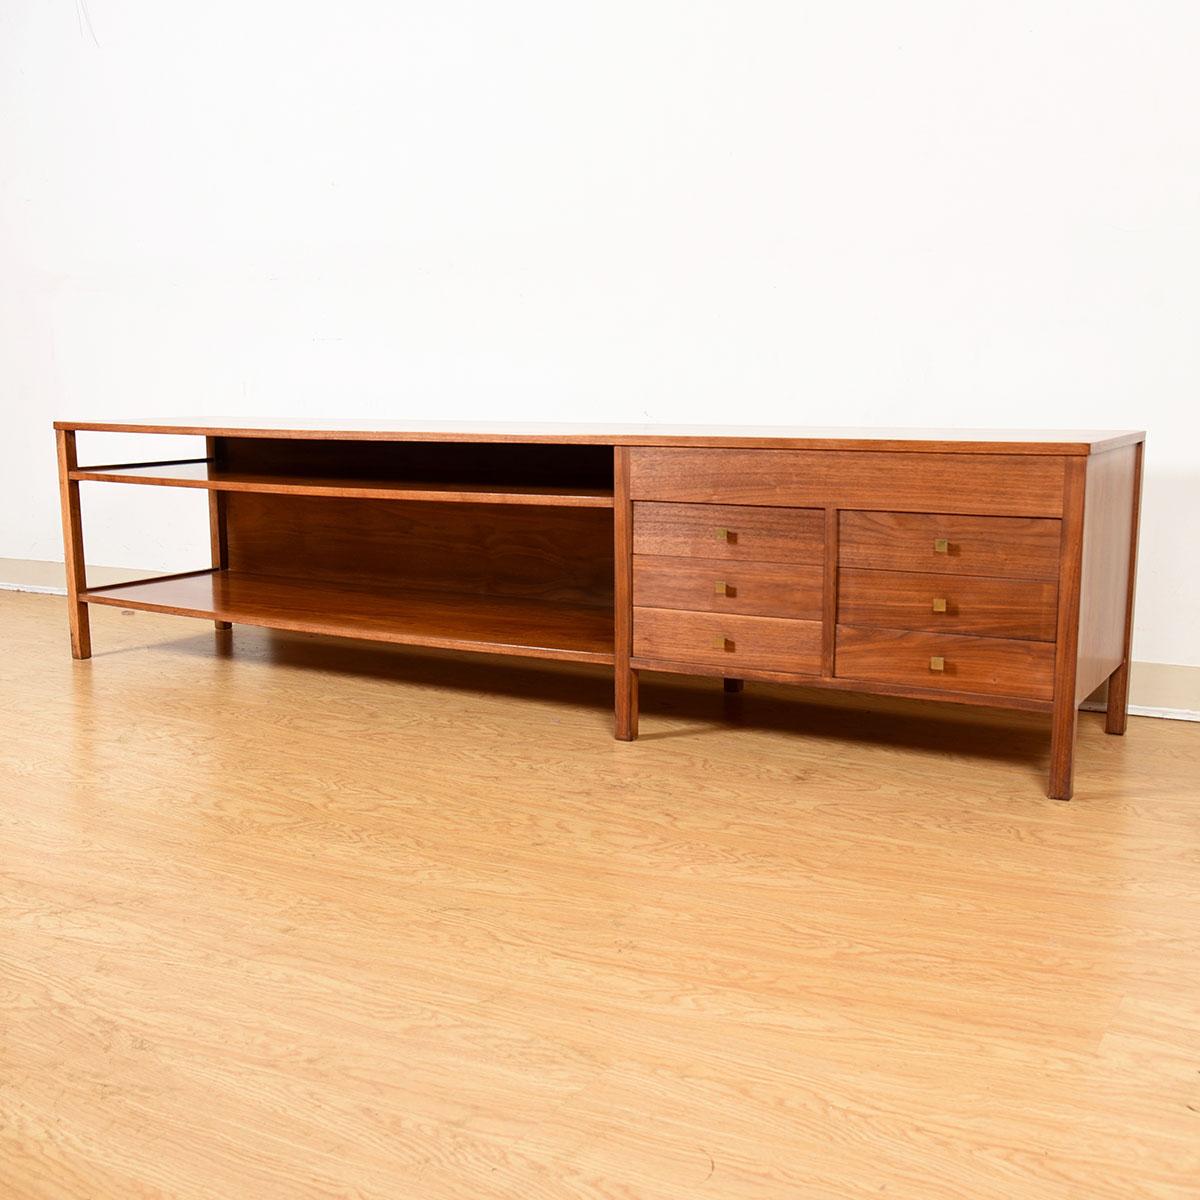 Rare Low Entertainment Console with Multifunctional Drawers/Accent Table by Paul McCobb, circa 1950s.

Additional information:
Featured at DC:
A custom creation by Paul McCobb circa 1950s. The four bottom ‘drawers’ flip over & expand to become